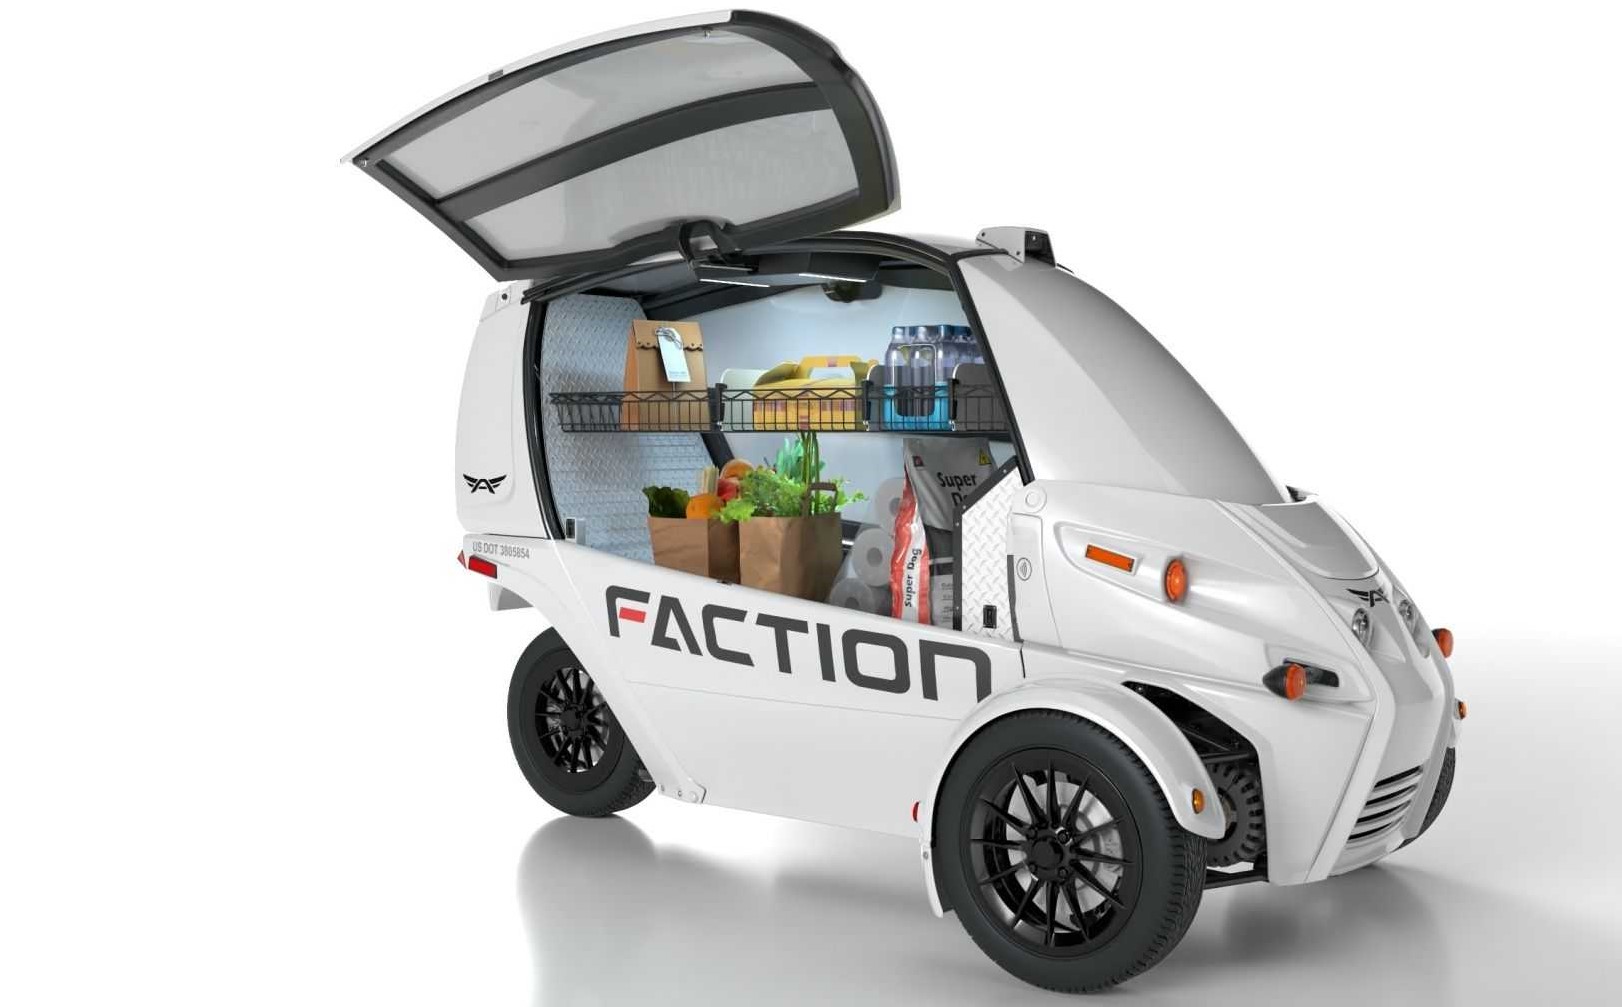 Faction Driverless Car Delivery View